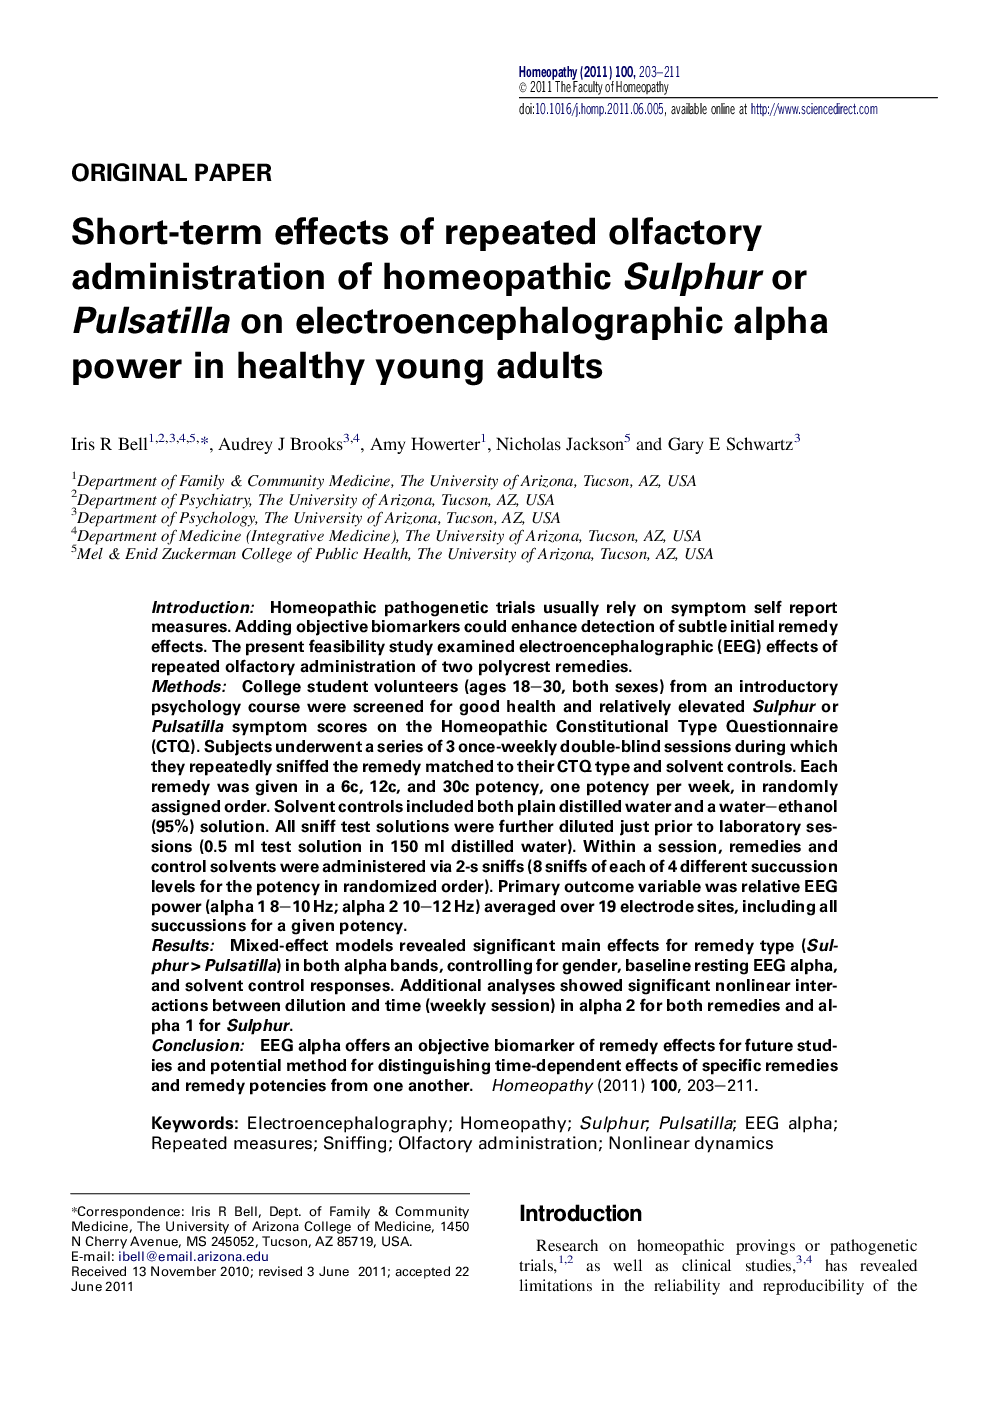 Short-term effects of repeated olfactory administration of homeopathic Sulphur or Pulsatilla on electroencephalographic alpha power in healthy young adults